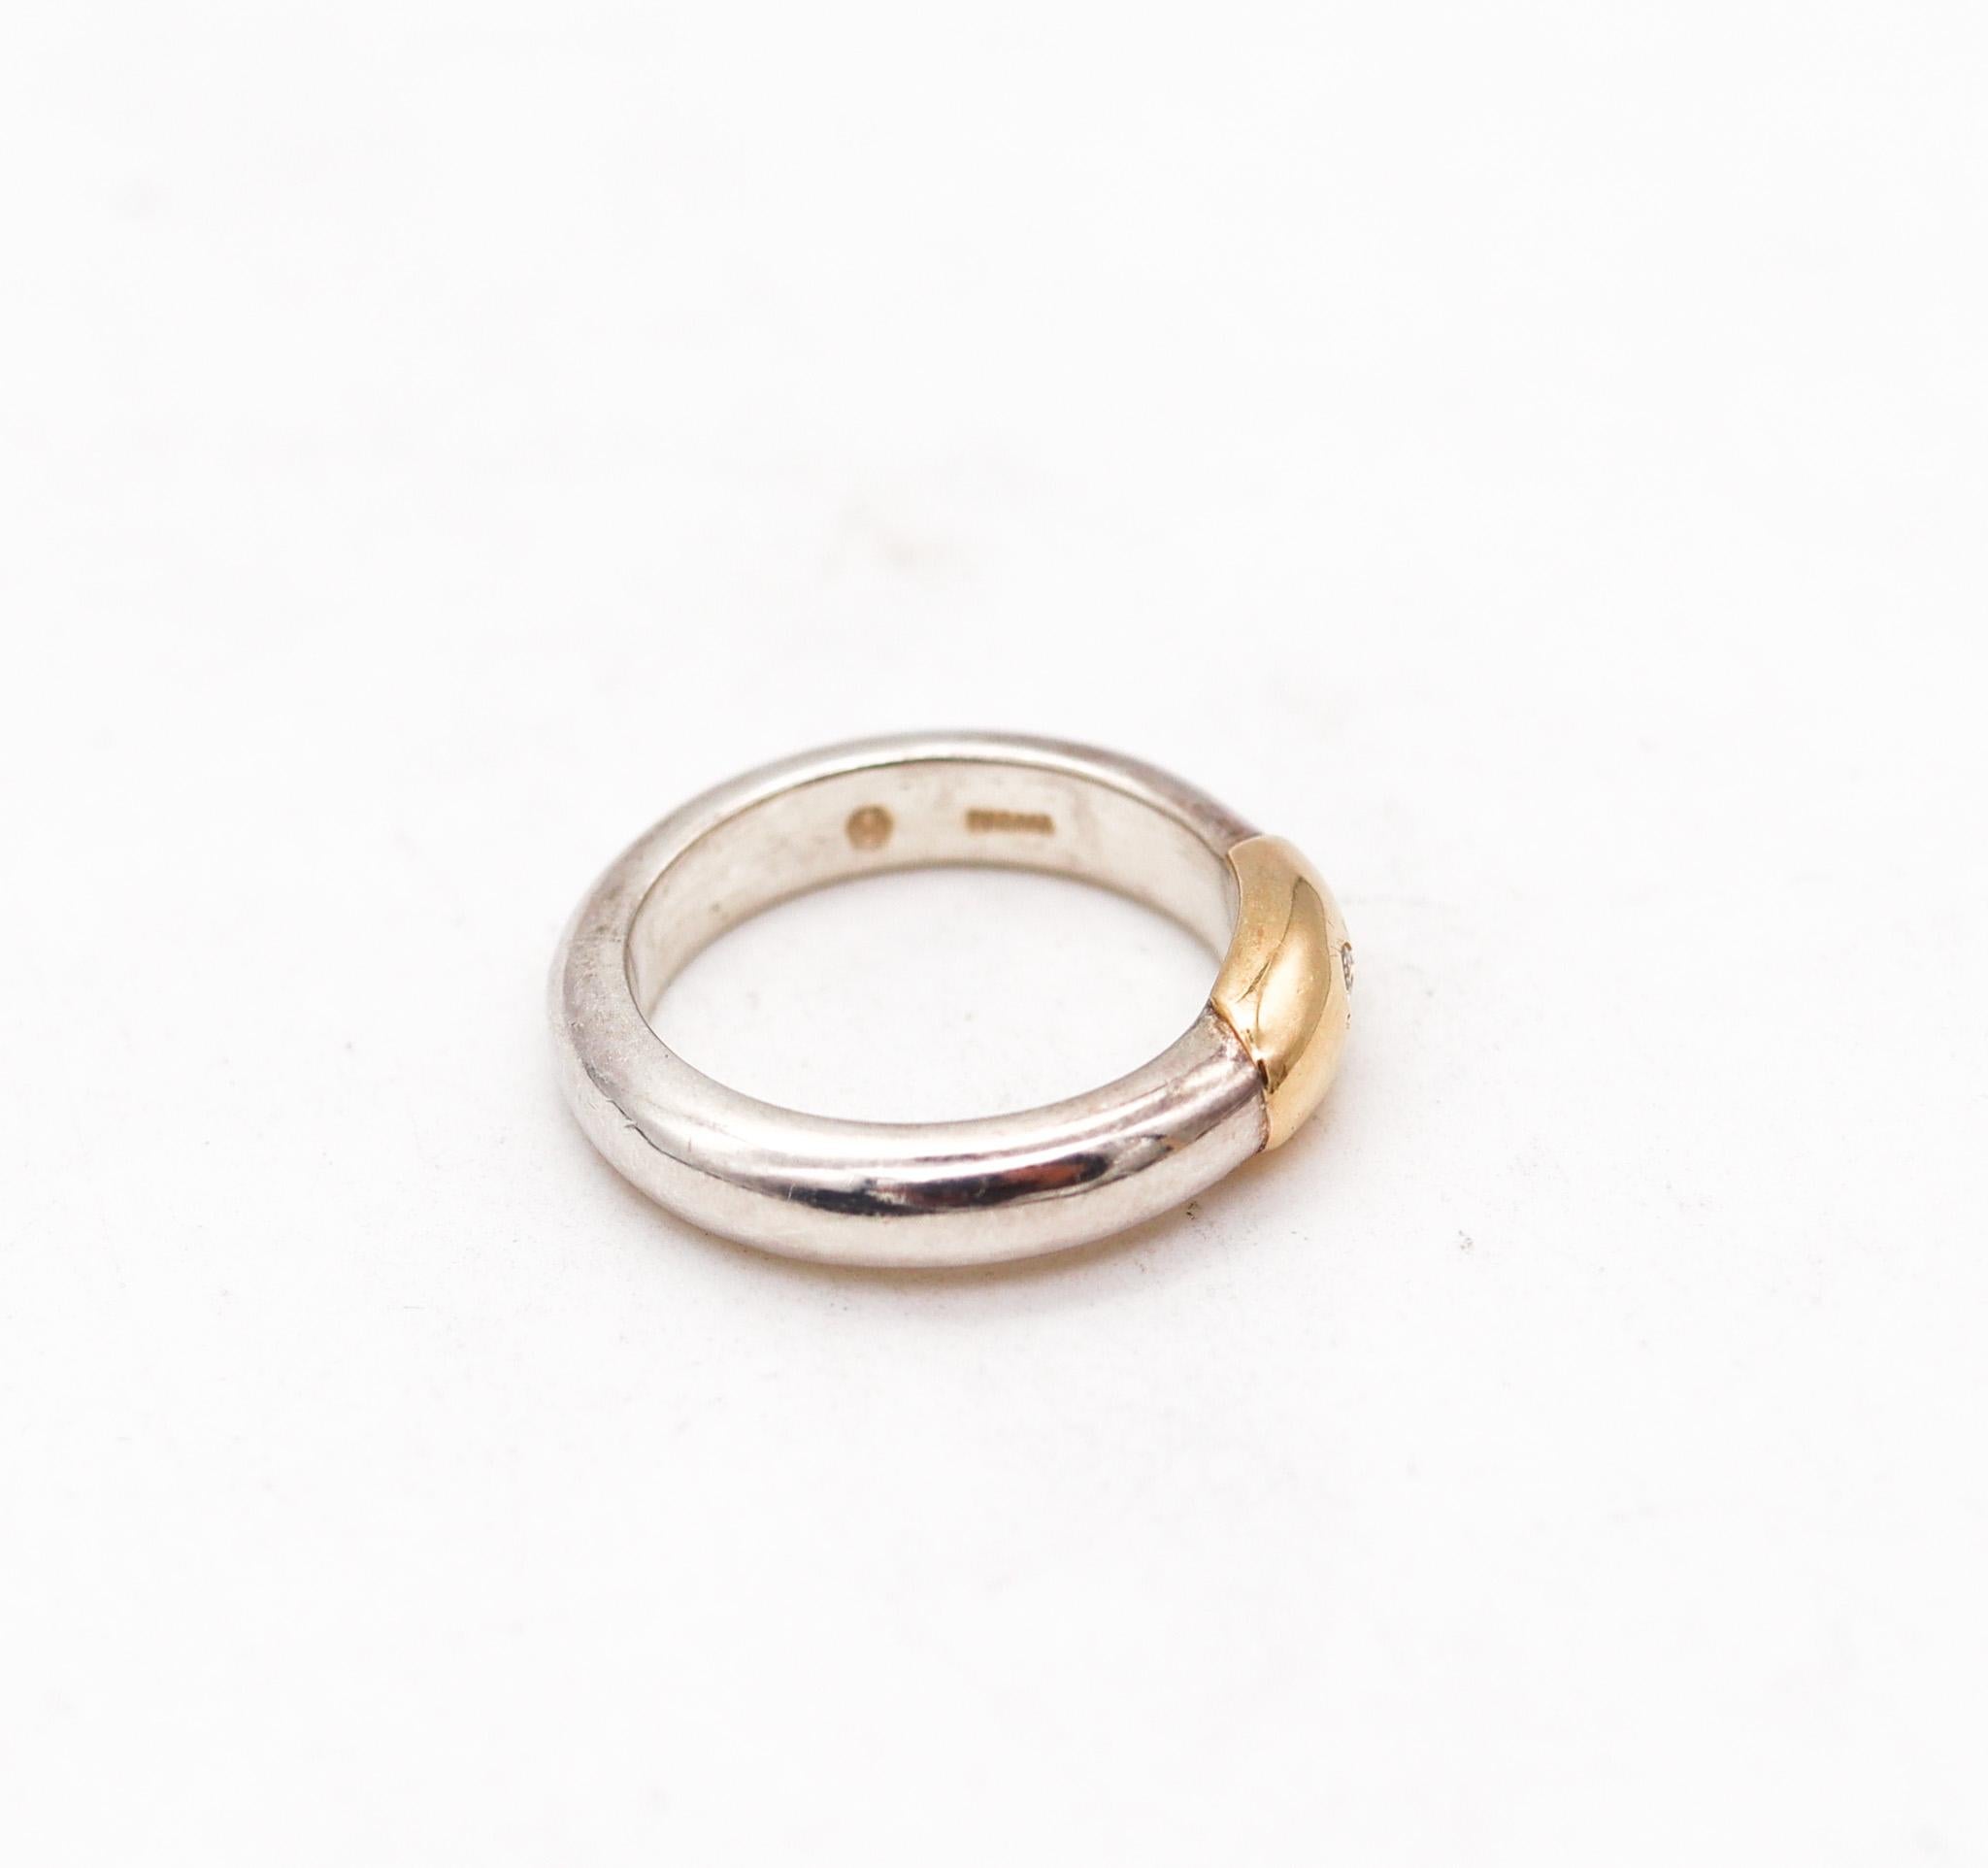 Modernist Lalaounis 1970 Greece Band Ring In 18Kt Yellow Gold & Sterling With One Diamond